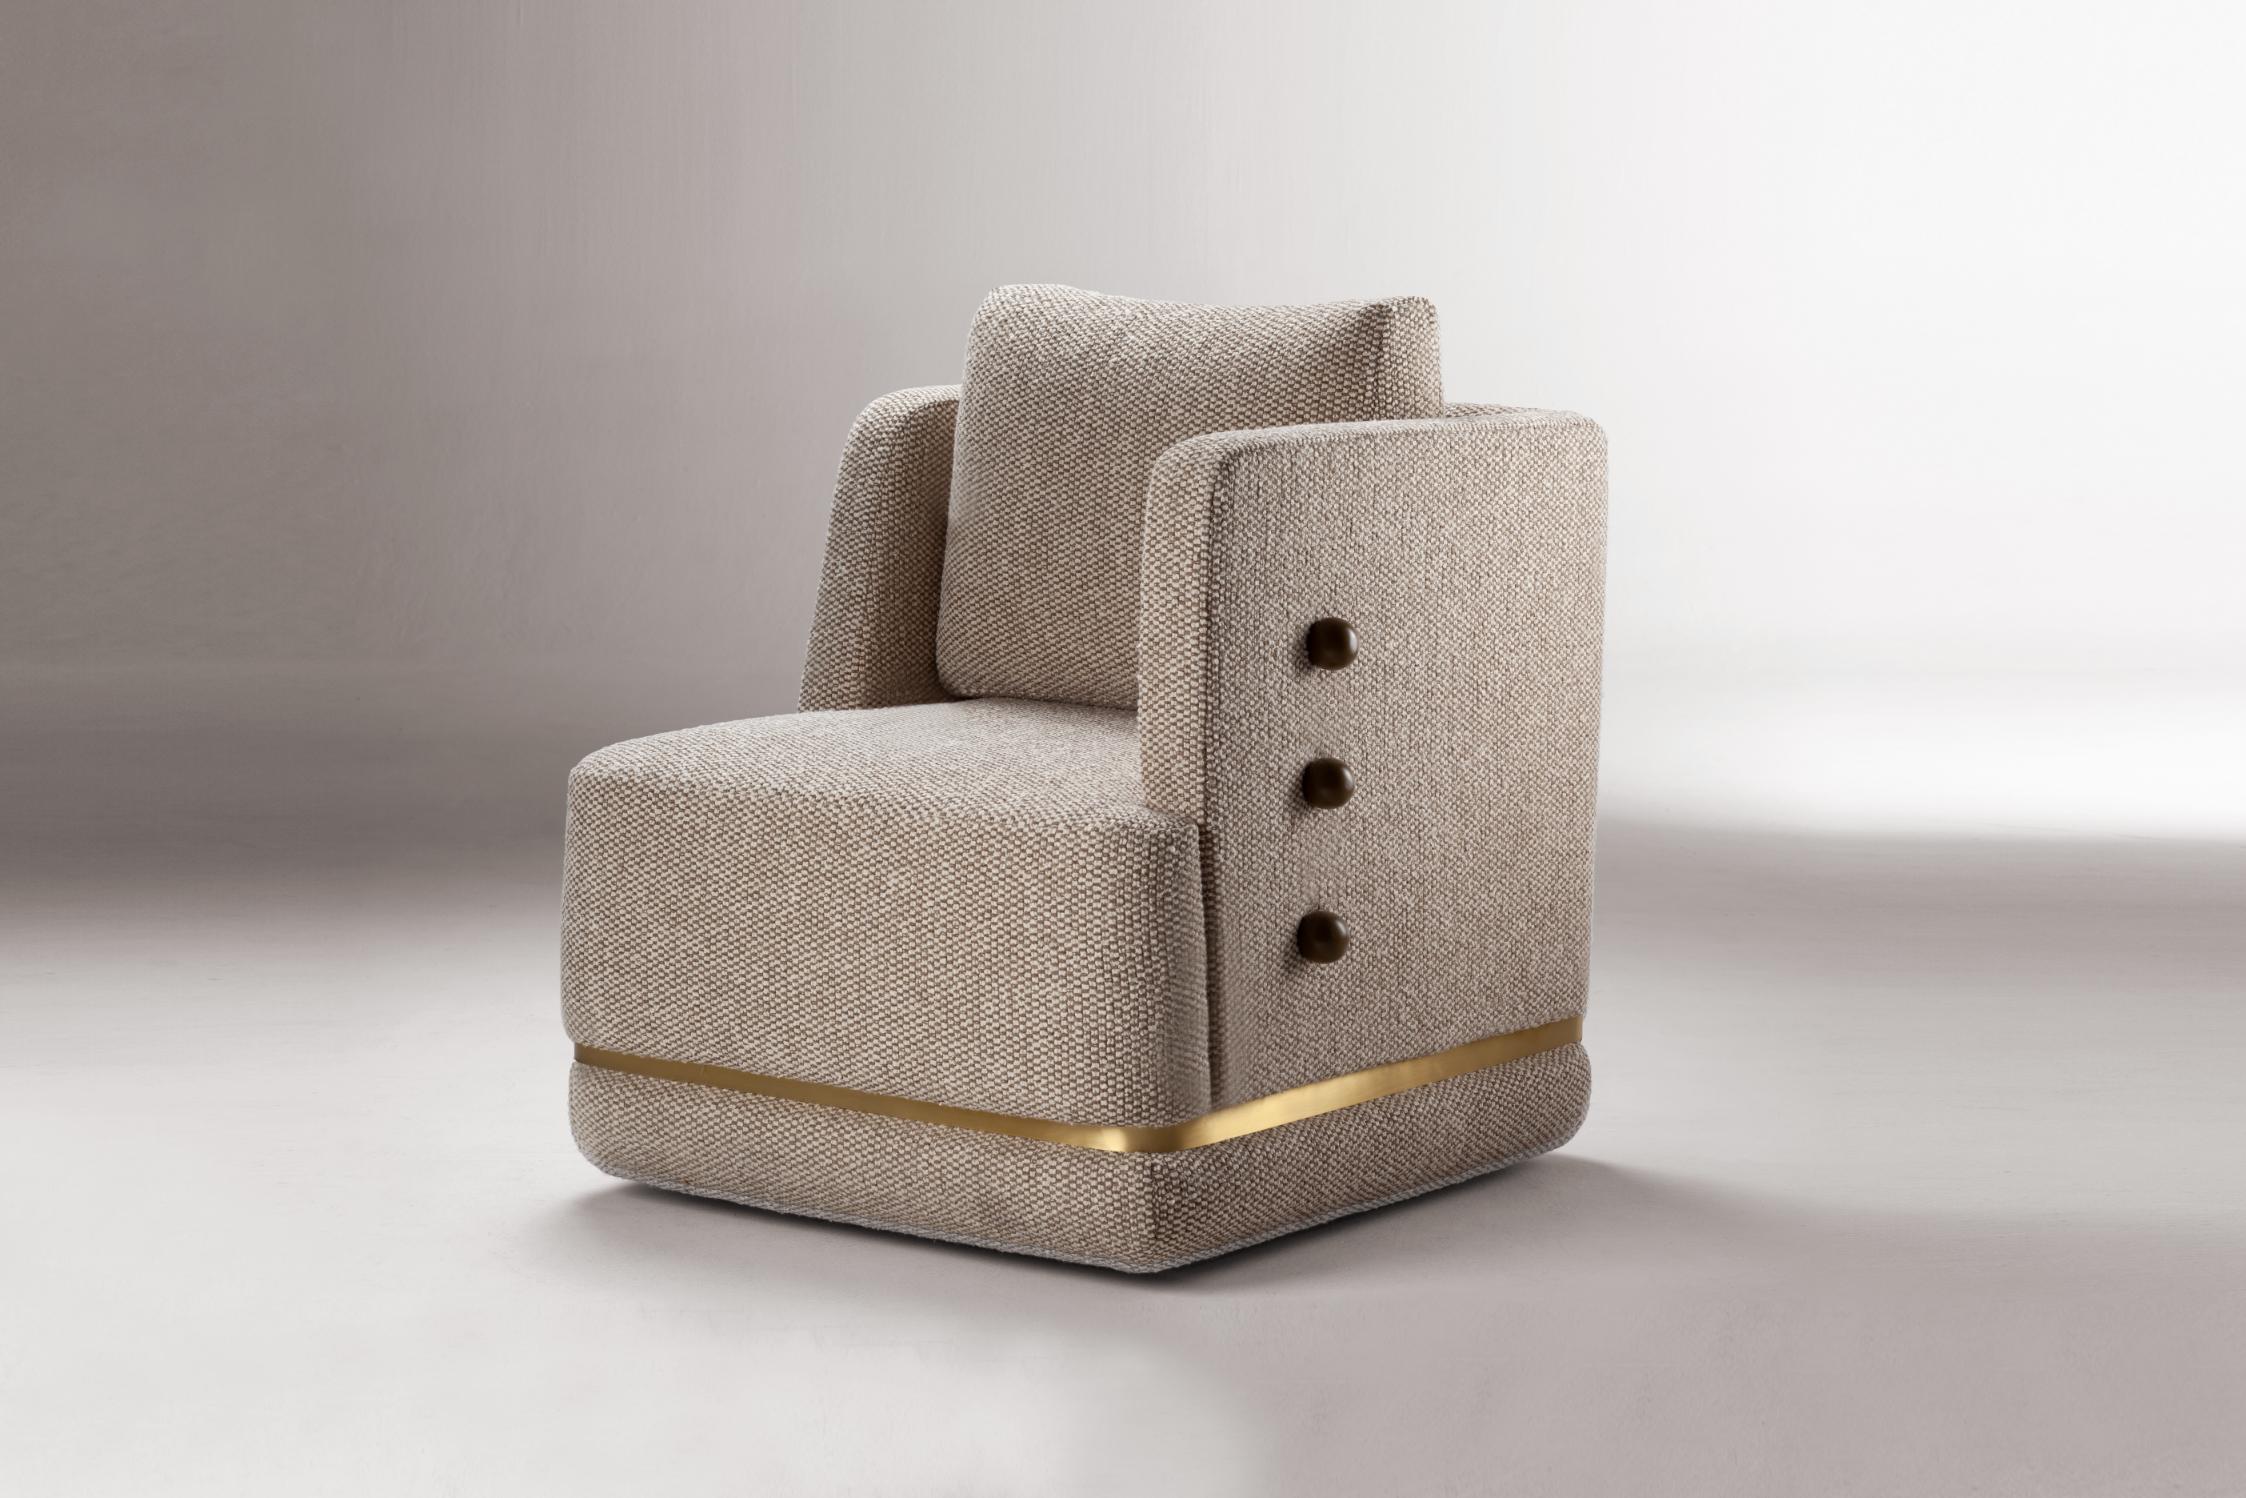 Panorama armchair by Dooq
Dimensions: W 73 x D 69 x H 86 cm
Materials: Upholstery.


Dooq is a design company dedicated to celebrate the luxury of living. Creating designs that stimulate the senses, whose conceptual approach is inspired on the